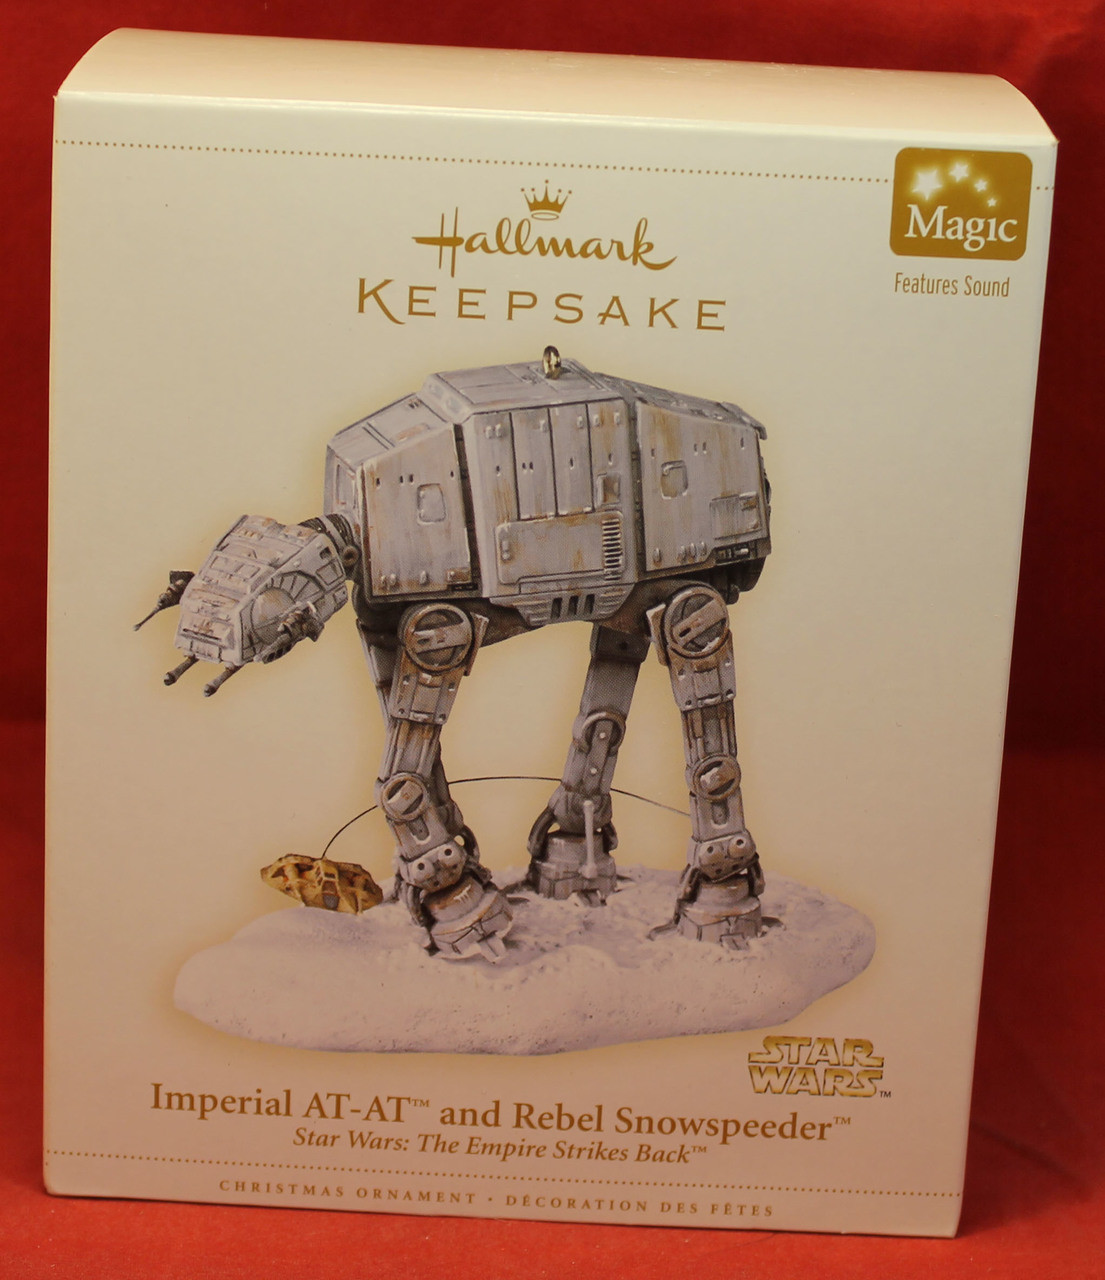 Star Wars Christmas Ornament - Imperial AT-AT Rebel Snowspeeder